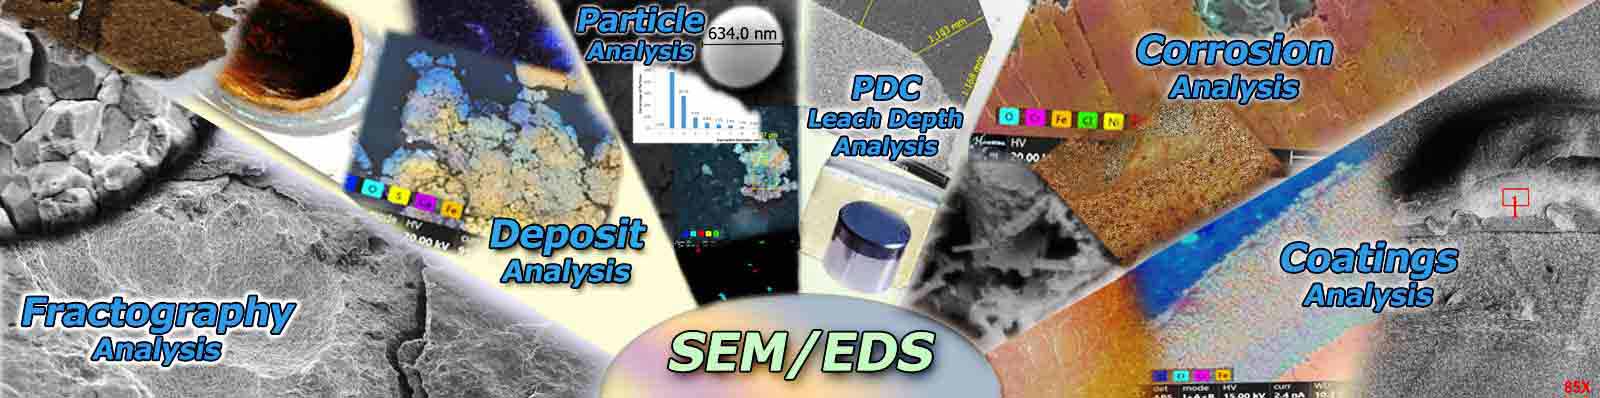 Segmented image of applications provided by the SEM and EDS analysis, Fractography analysis, Deposit Analysis, Particle Analysis, PDC Leach Depth analysis, Corrosion analysis, Coating analysis